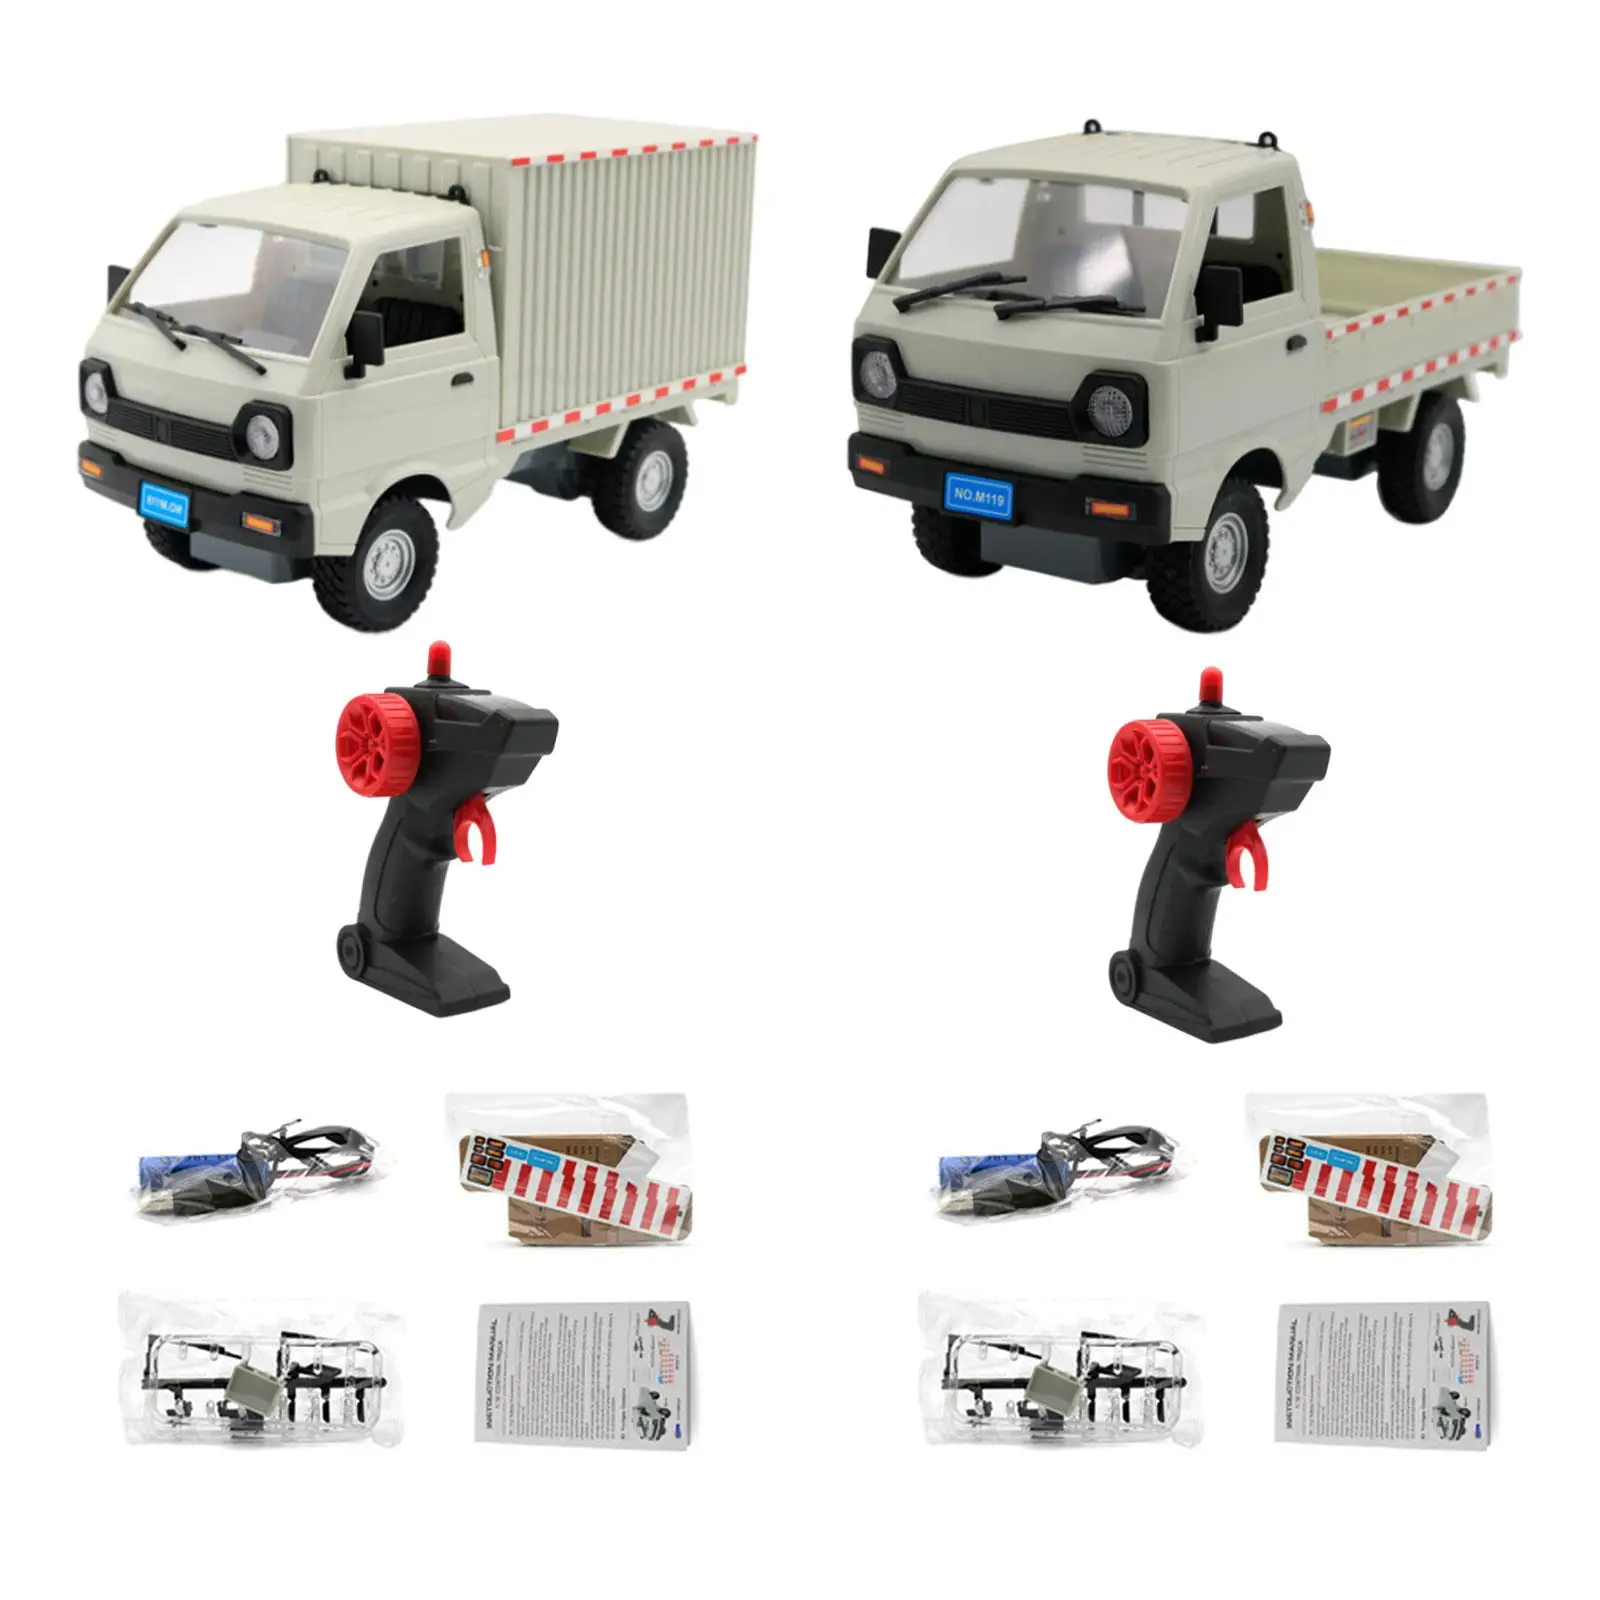 1:16 Scale High Speed RC Car Easy to Control RC Vehicles RC Carry Truck USB Rechargeable 2WD Steering Control Pickup Truck Gifts